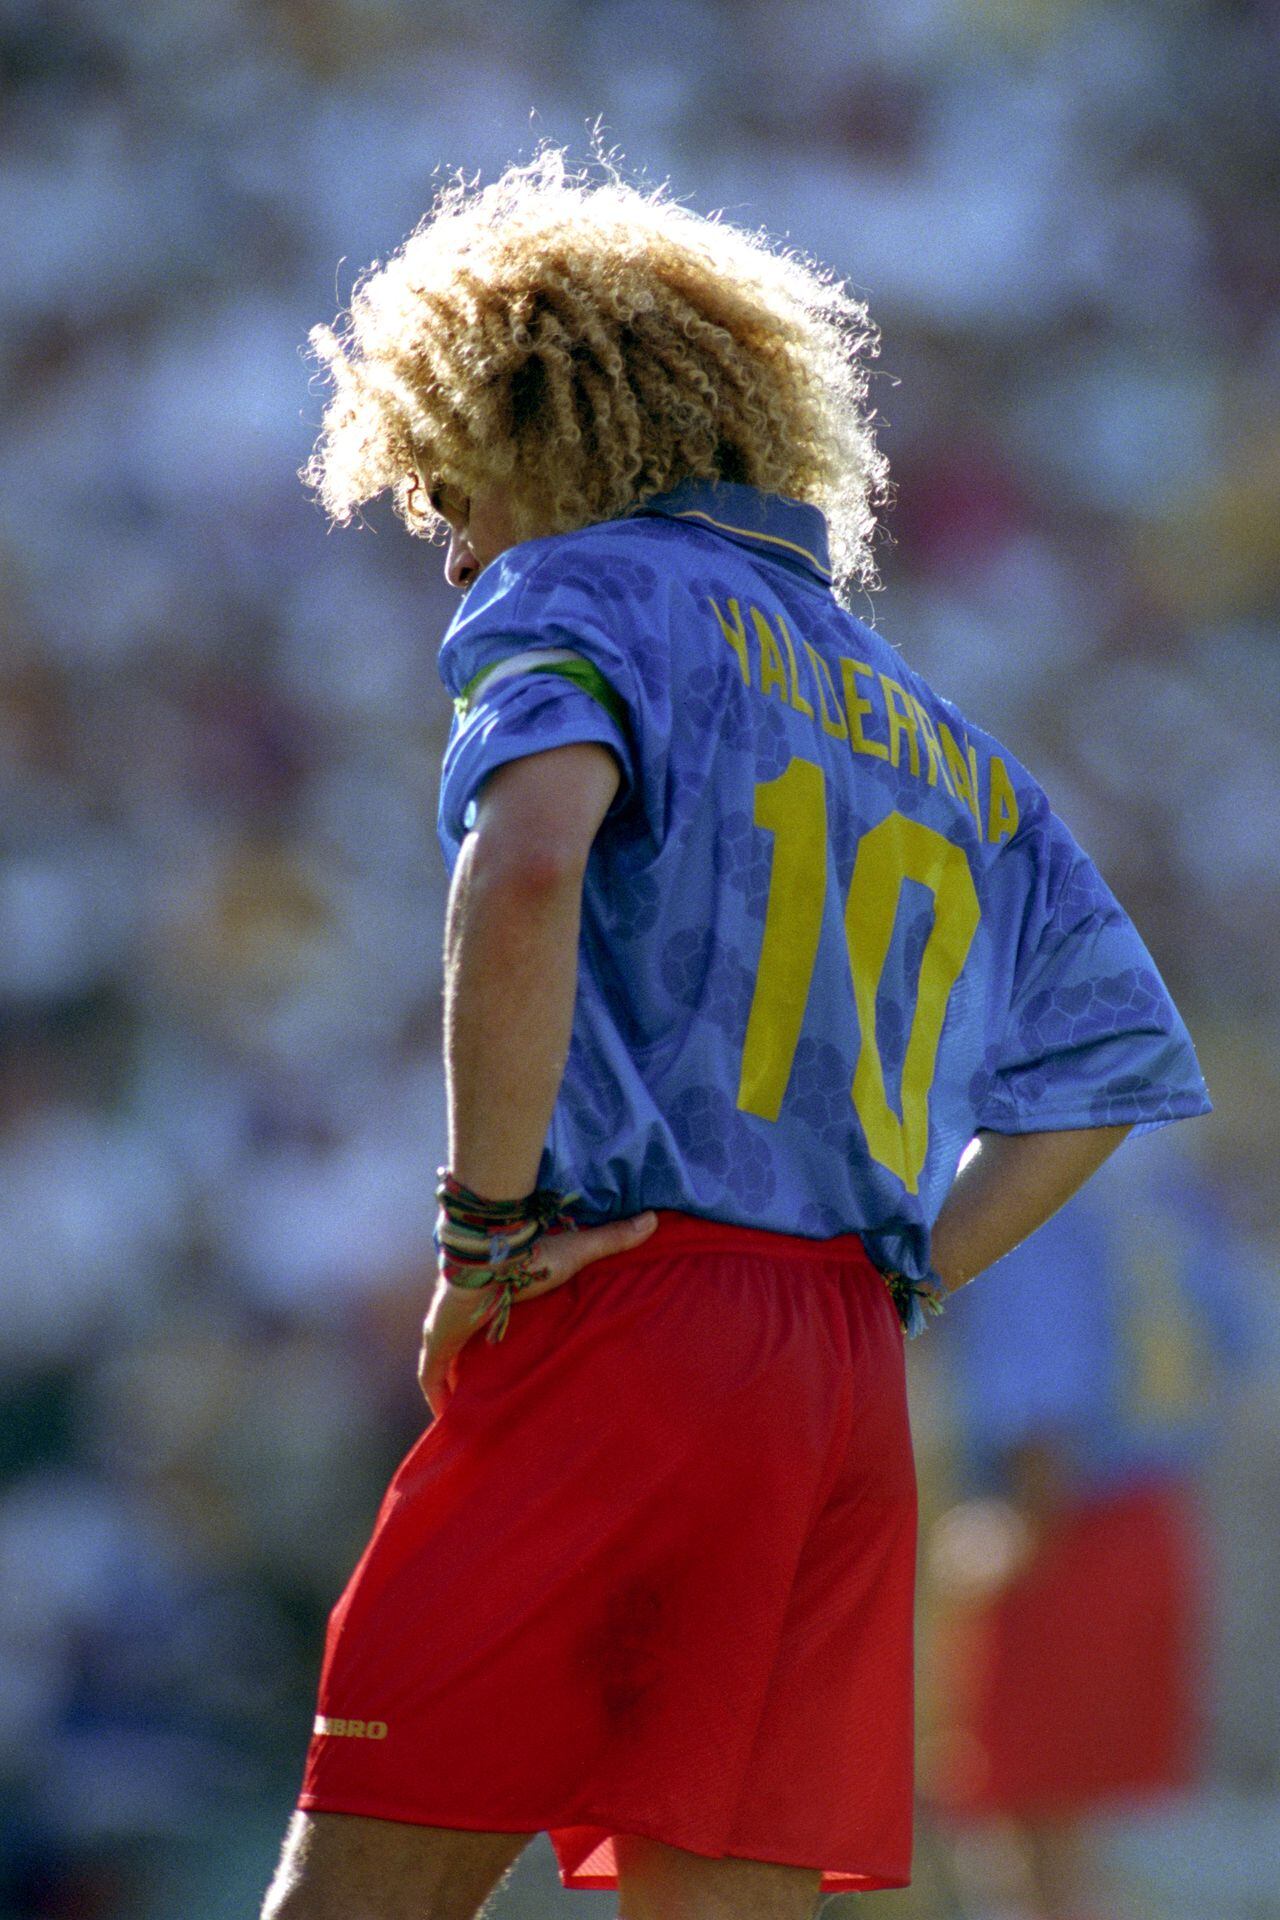 Colombia's captain Carlos Valderrama can't hide his disappointment as his side trail Romania by three goals to one.   (Photo by Tony Marshall - PA Images via Getty Images)